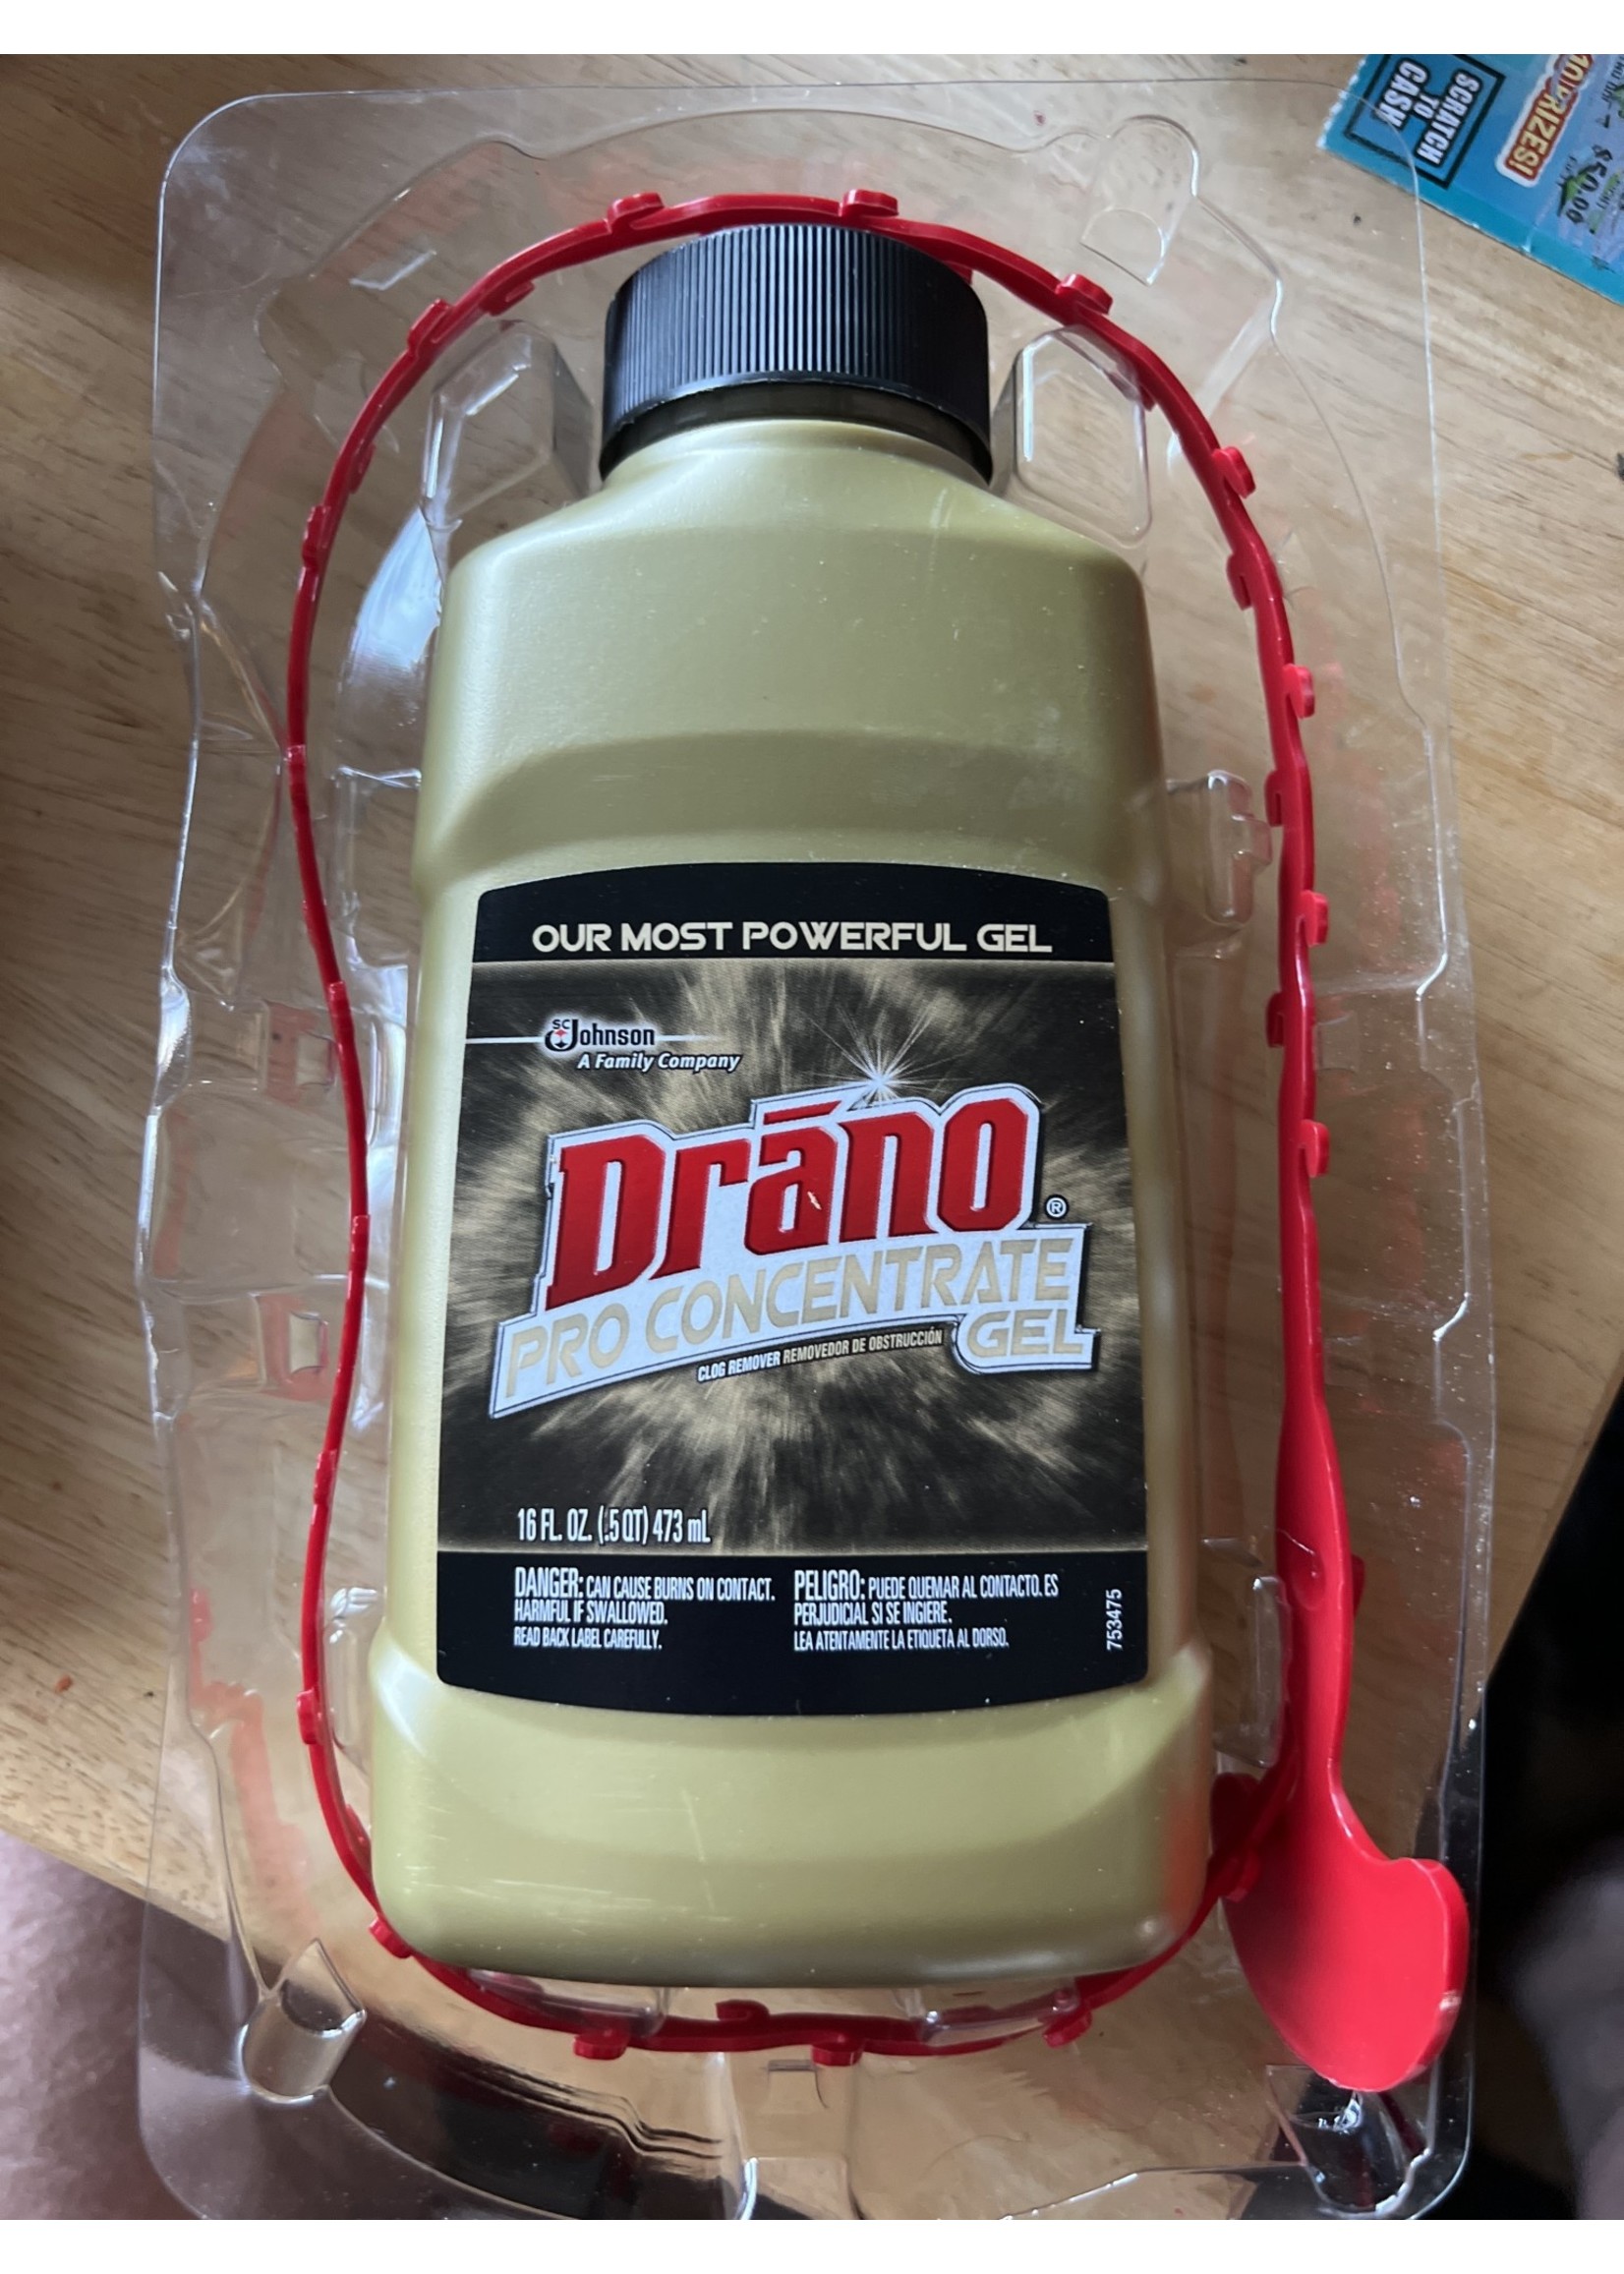 Drano Pro Concentrate Gel w/ snake 16oz